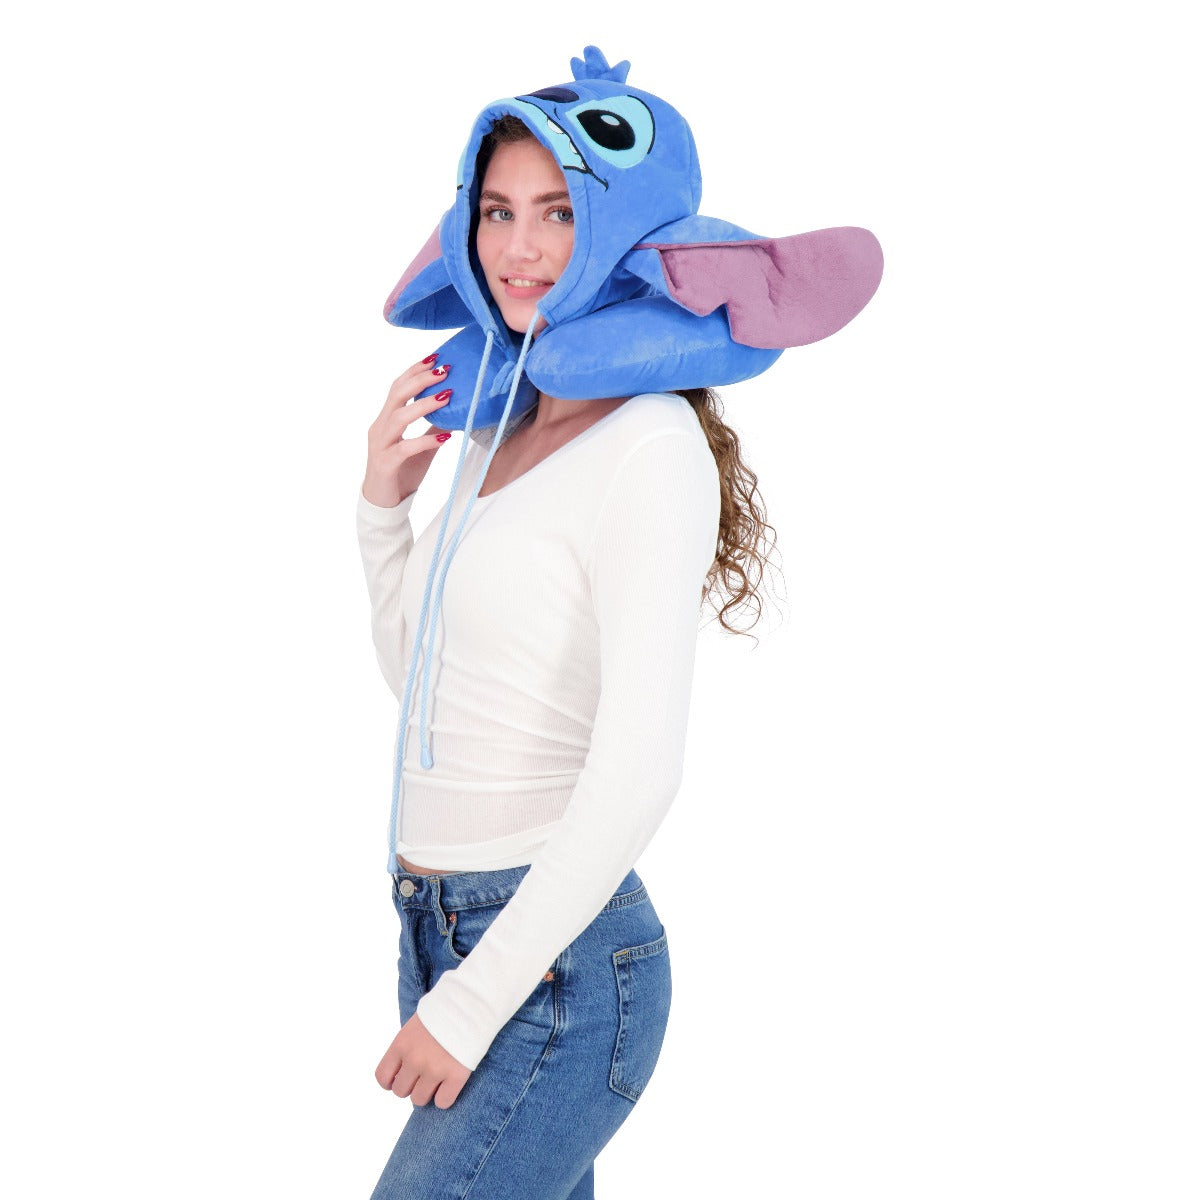 Blue Ful Disney Stitch hooded hoodie travel pillow - best neck pillows for traveling adults and kids